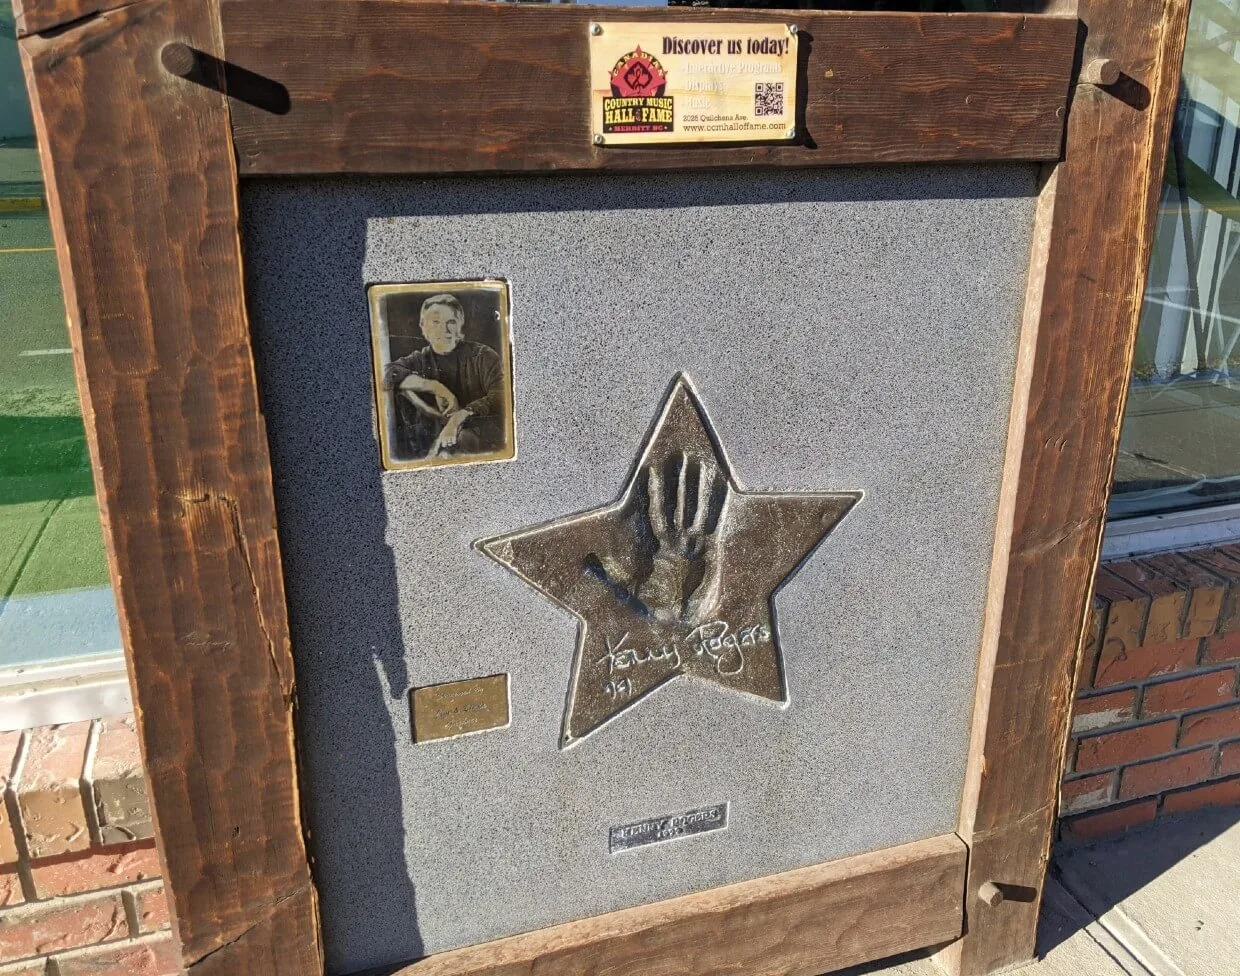  Close up of embossed gold star with Kenny Rogers hand print and signature on wooden plaque, with photograph of musician on left